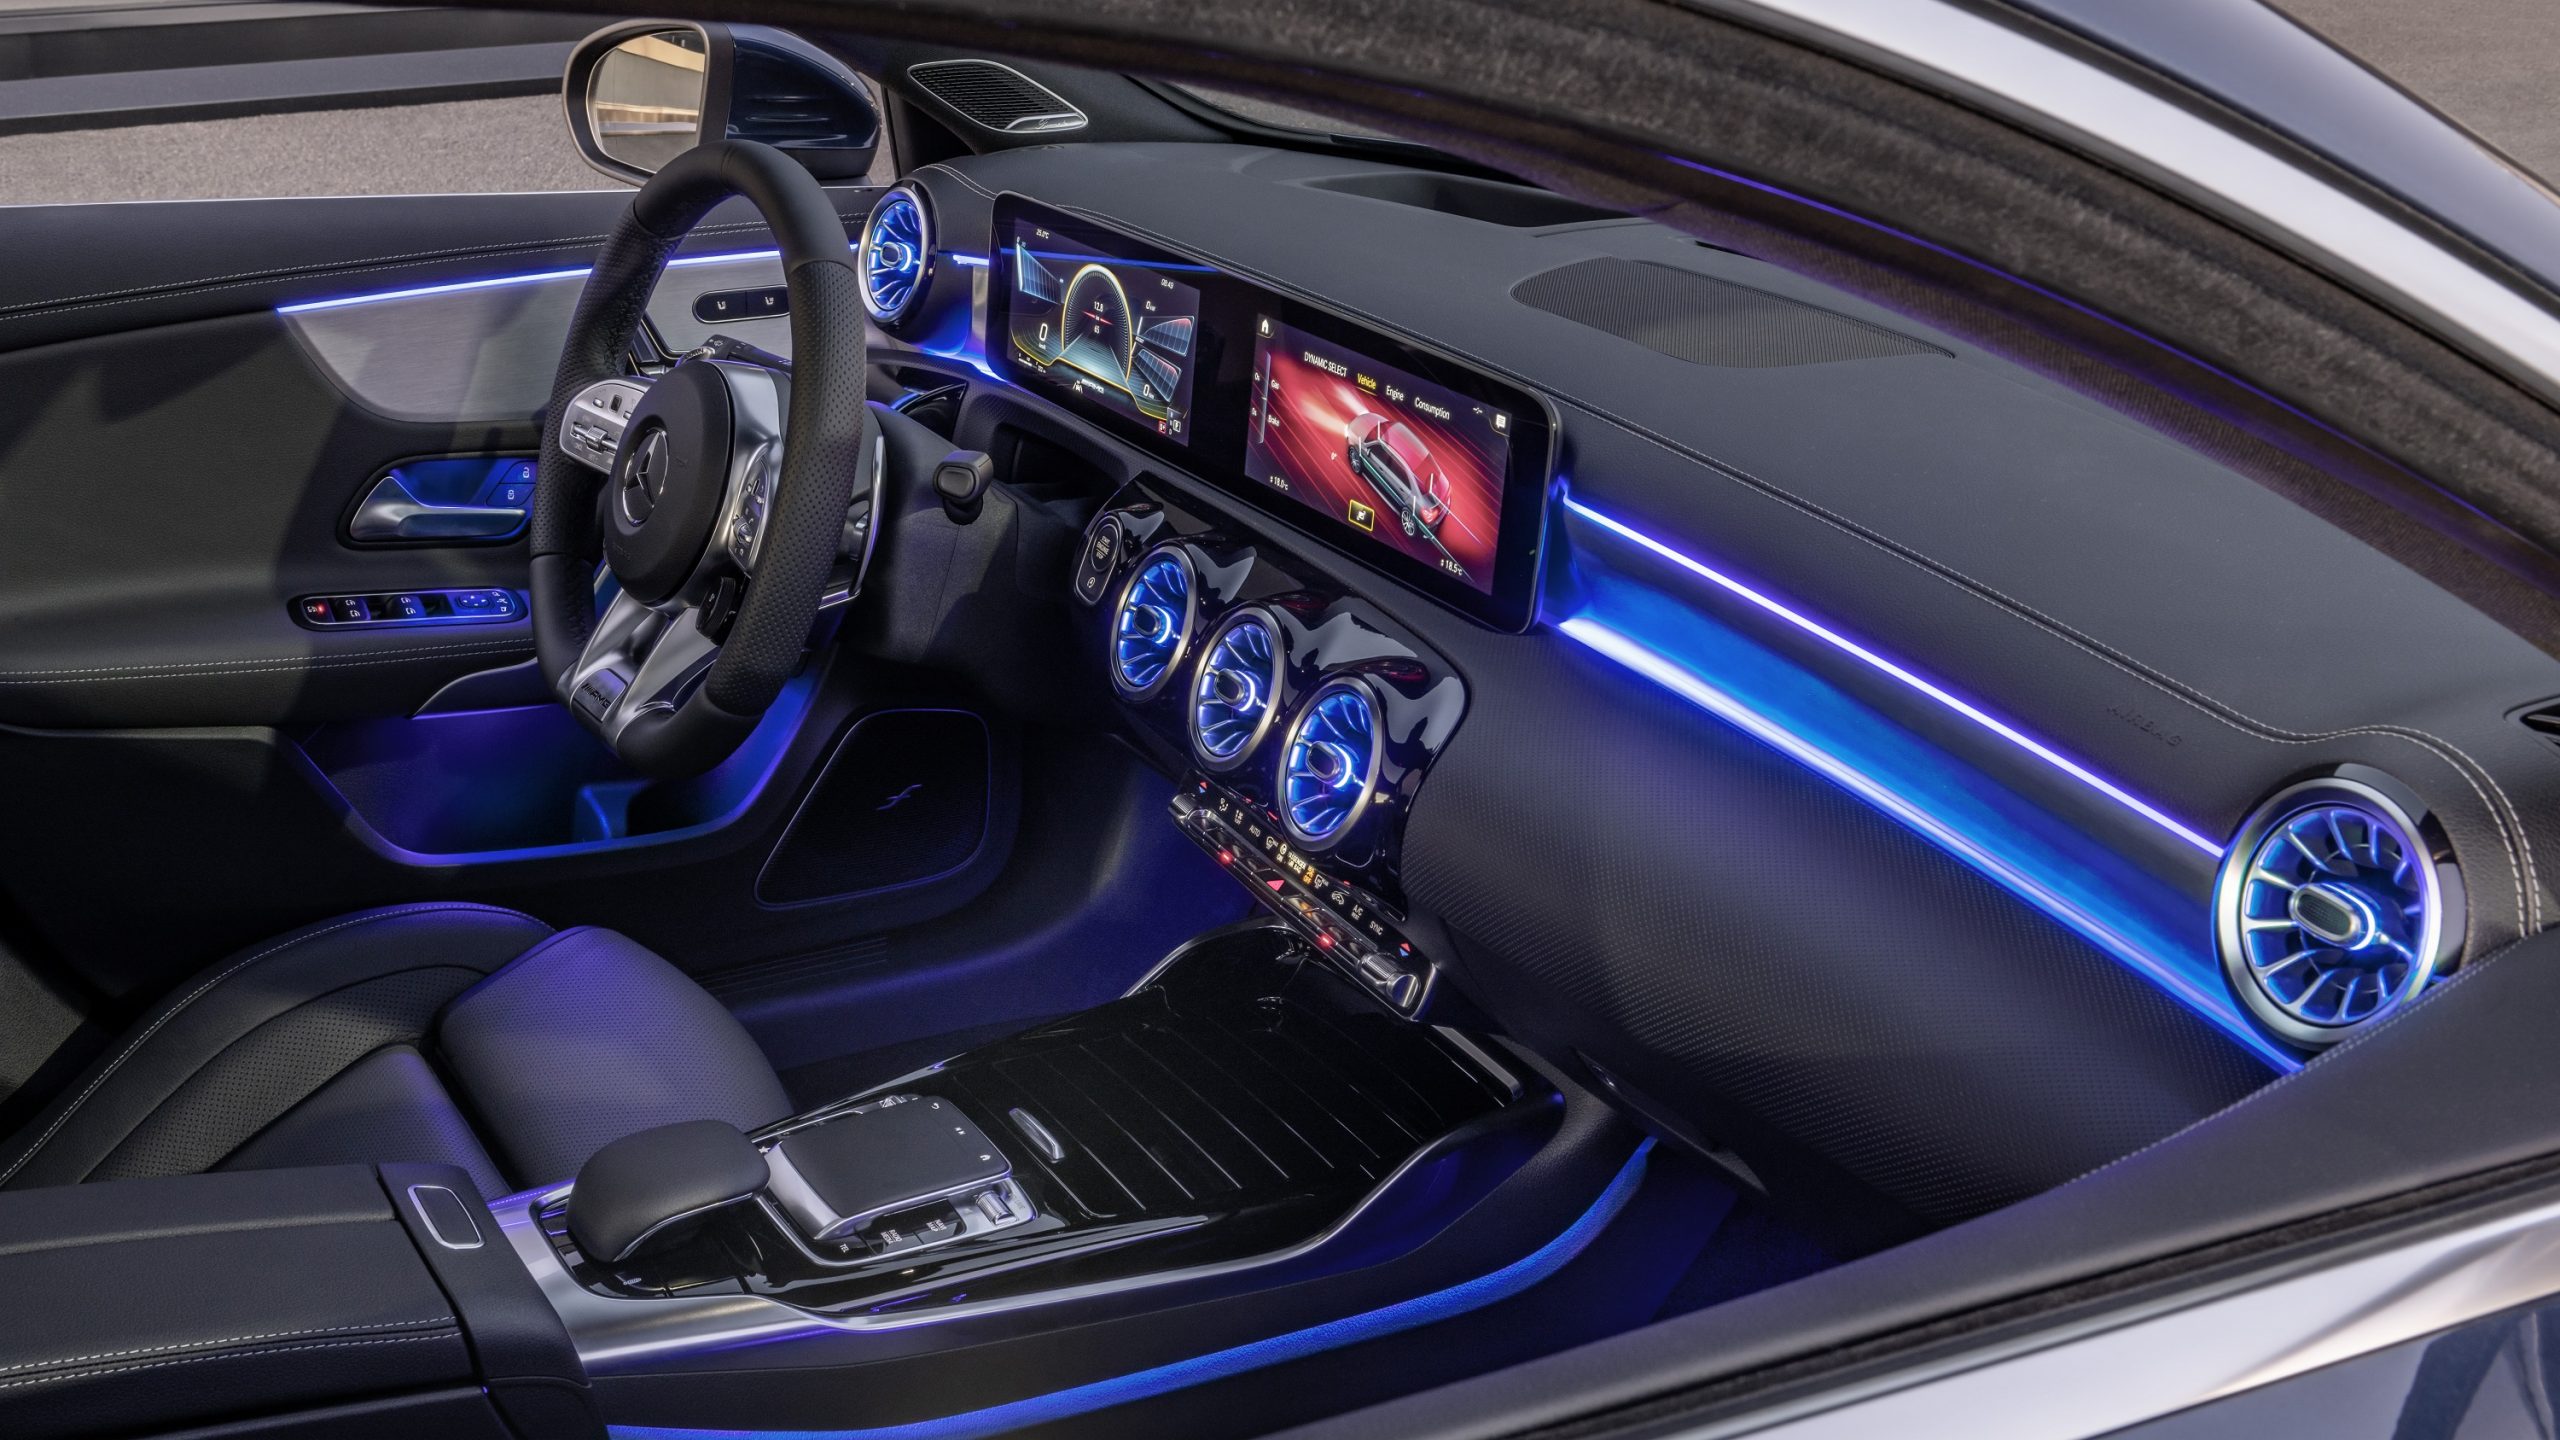 The interior of the Mercedes-AMG A35 sedan with blue ambient lighting